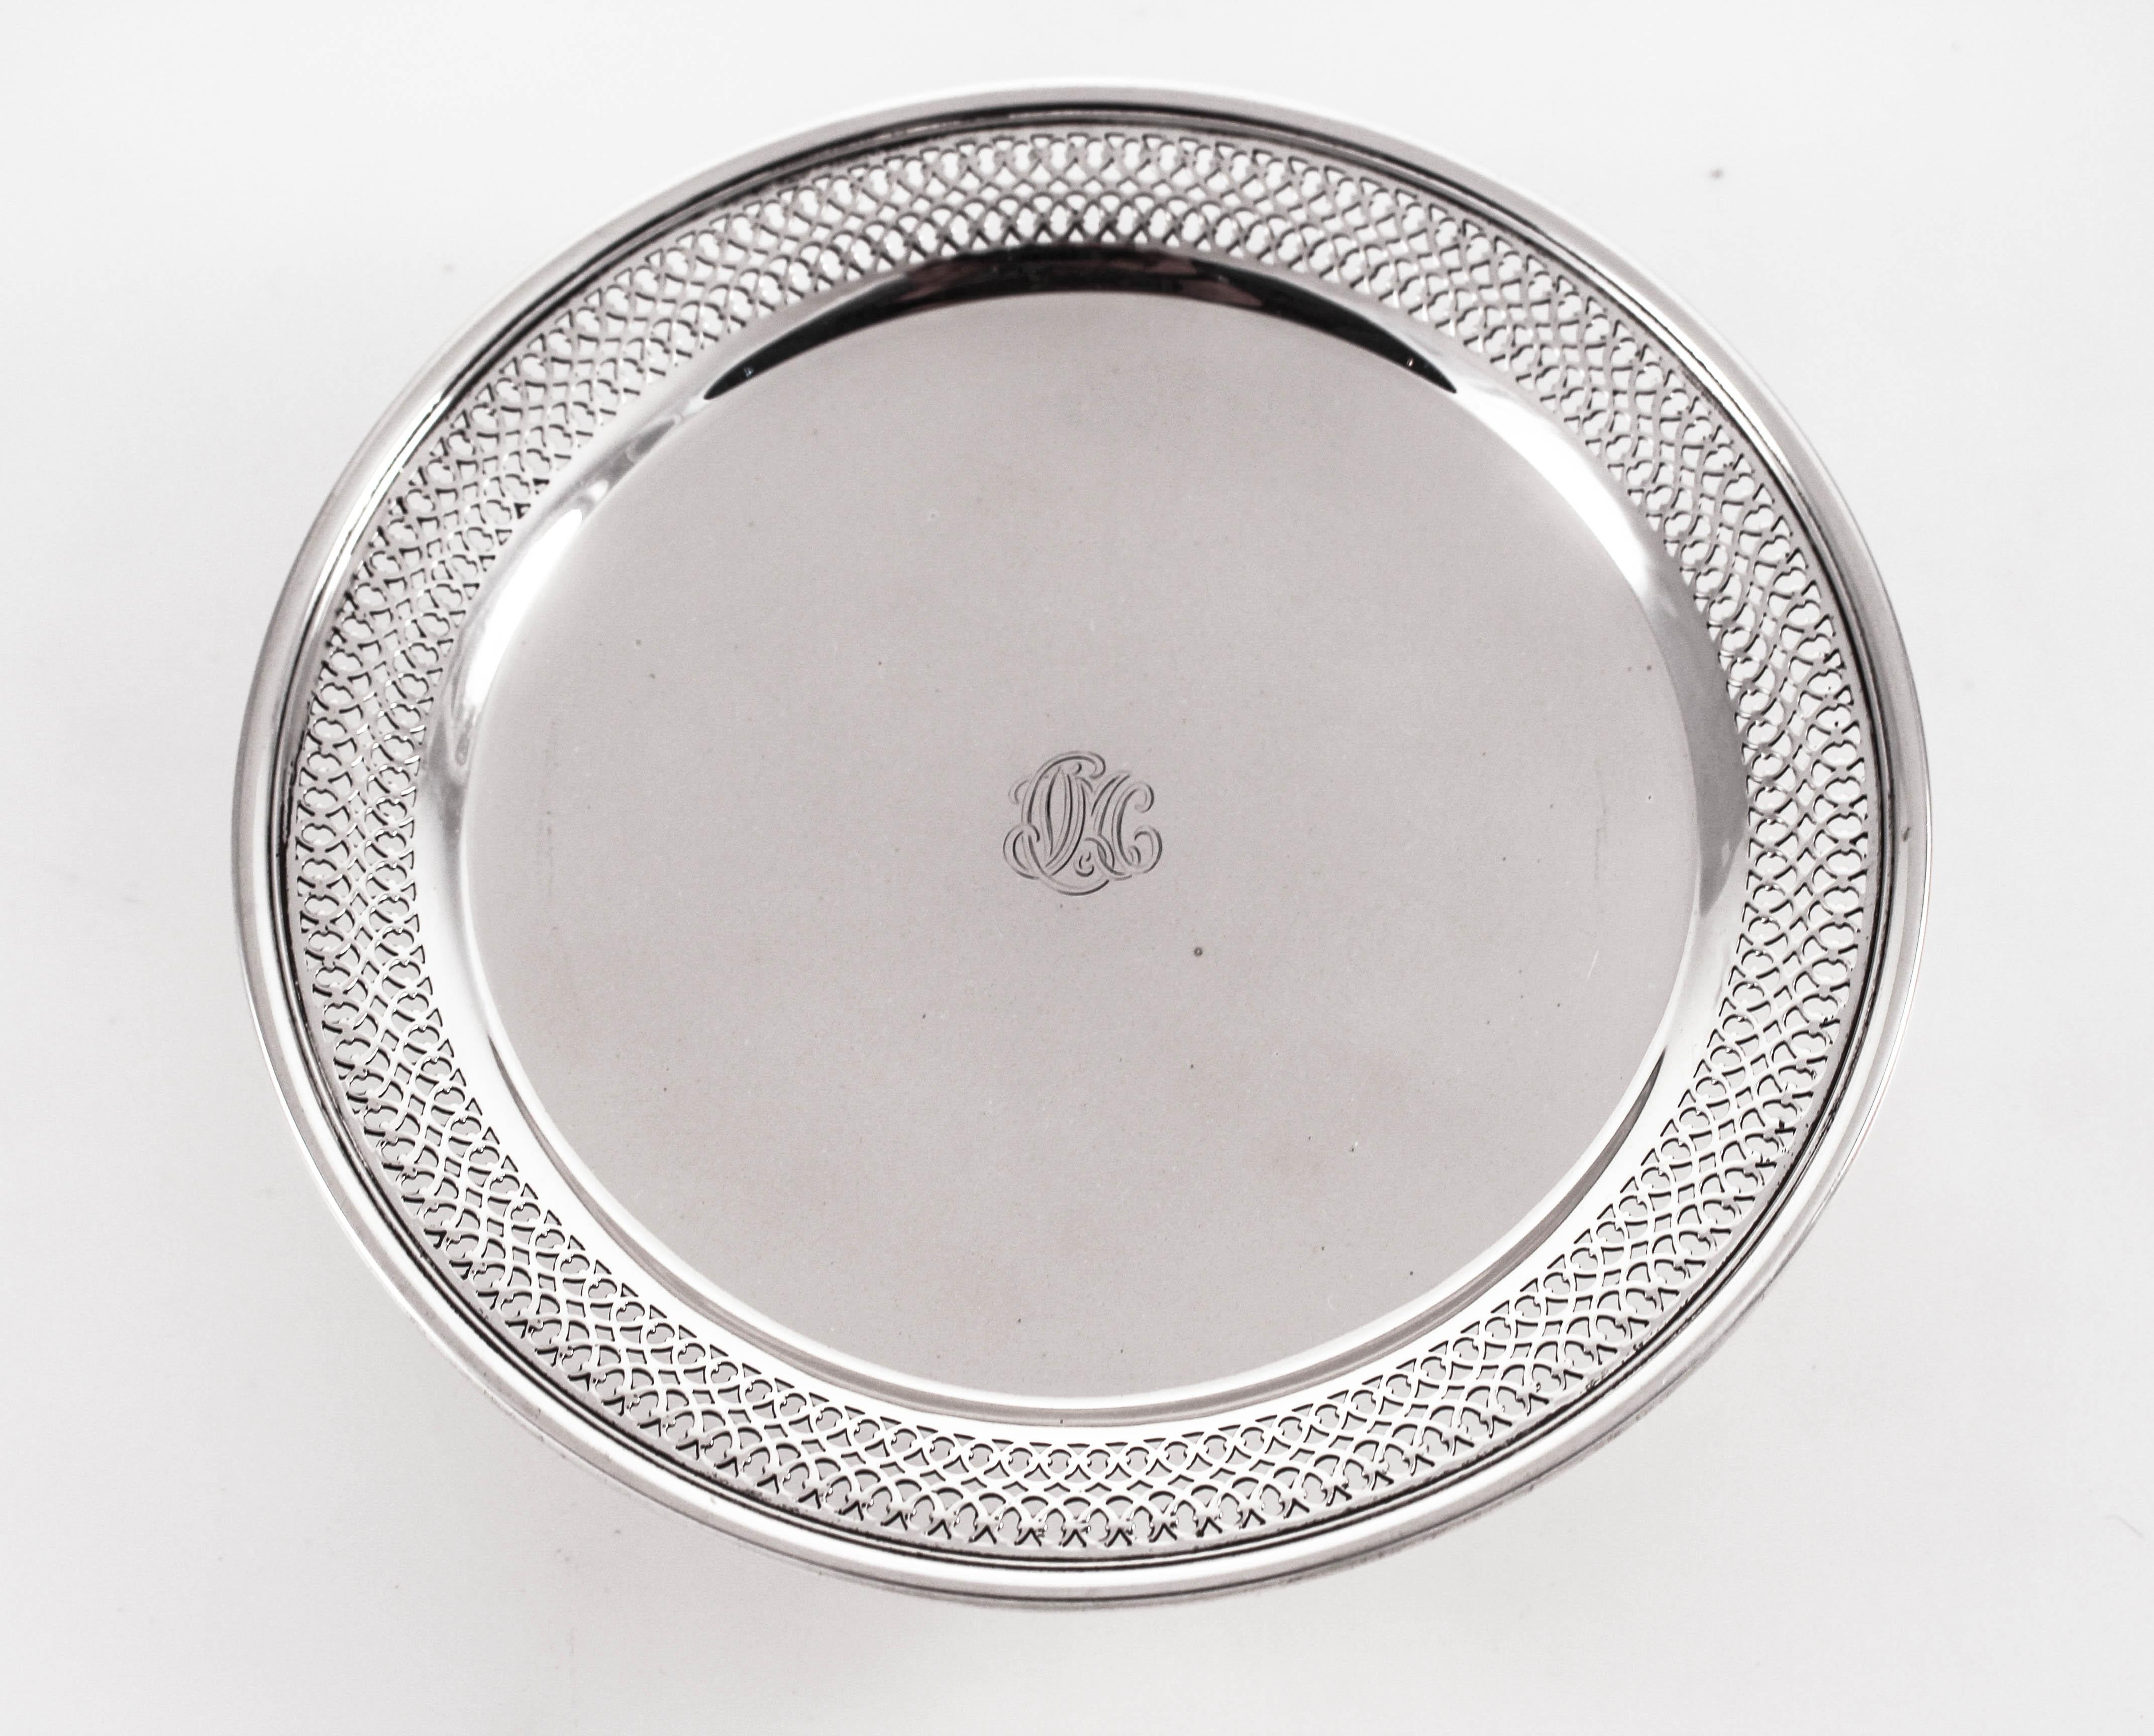 A sterling silver cake plate by the famous Tiffany & Company. It has latticework around the edge and is flat in the center. It stands on a center pedestal and is not weighted. Perfect for a tart or small cake, even finger sandwiches.